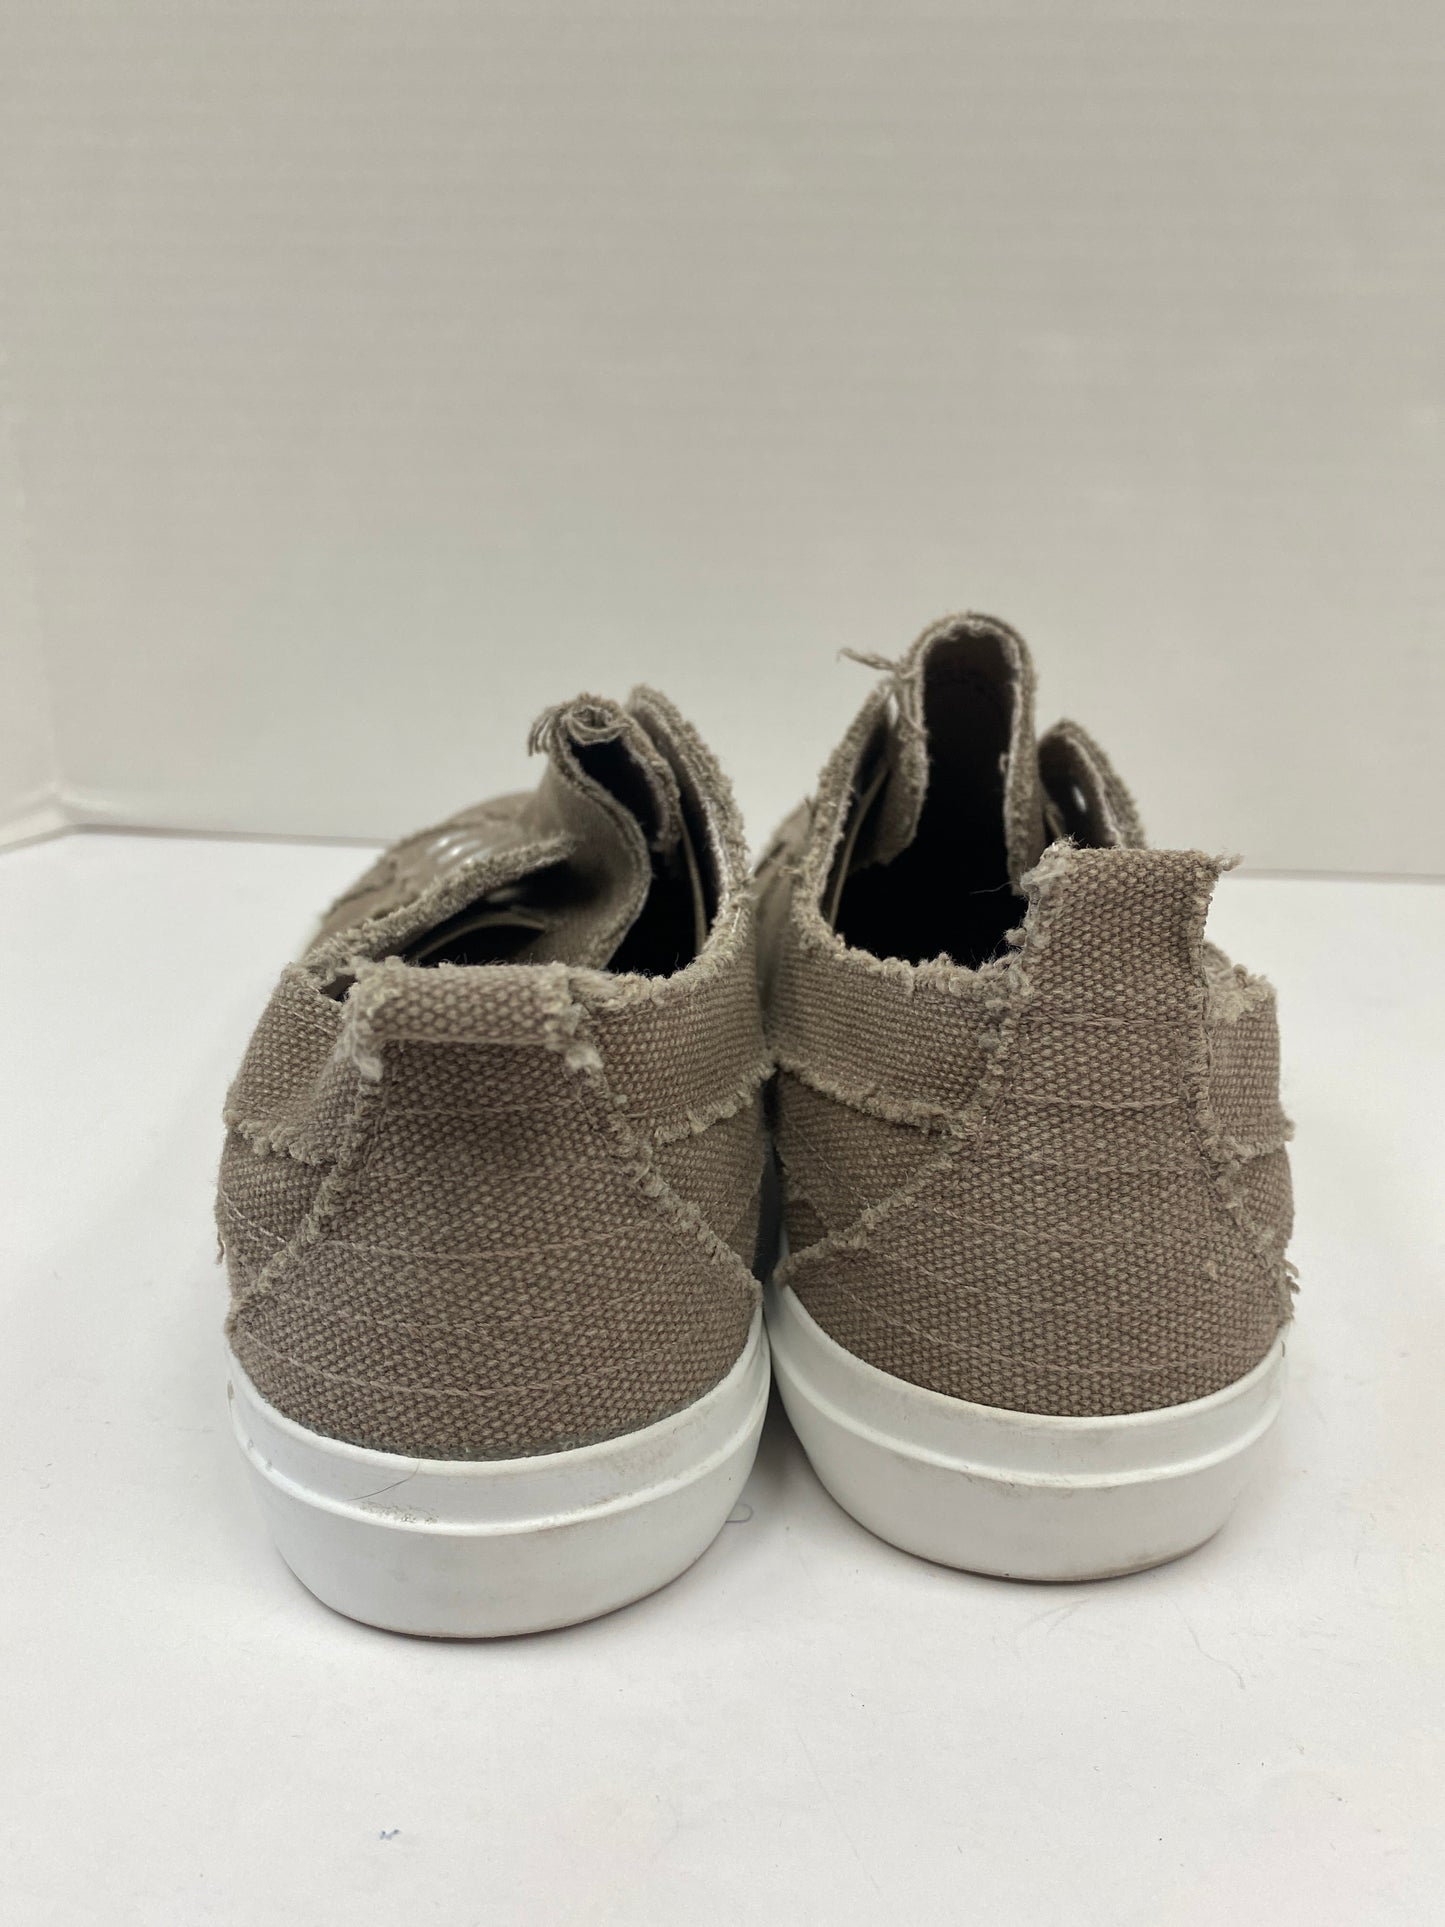 Taupe Shoes Sneakers Corkys, Size 7